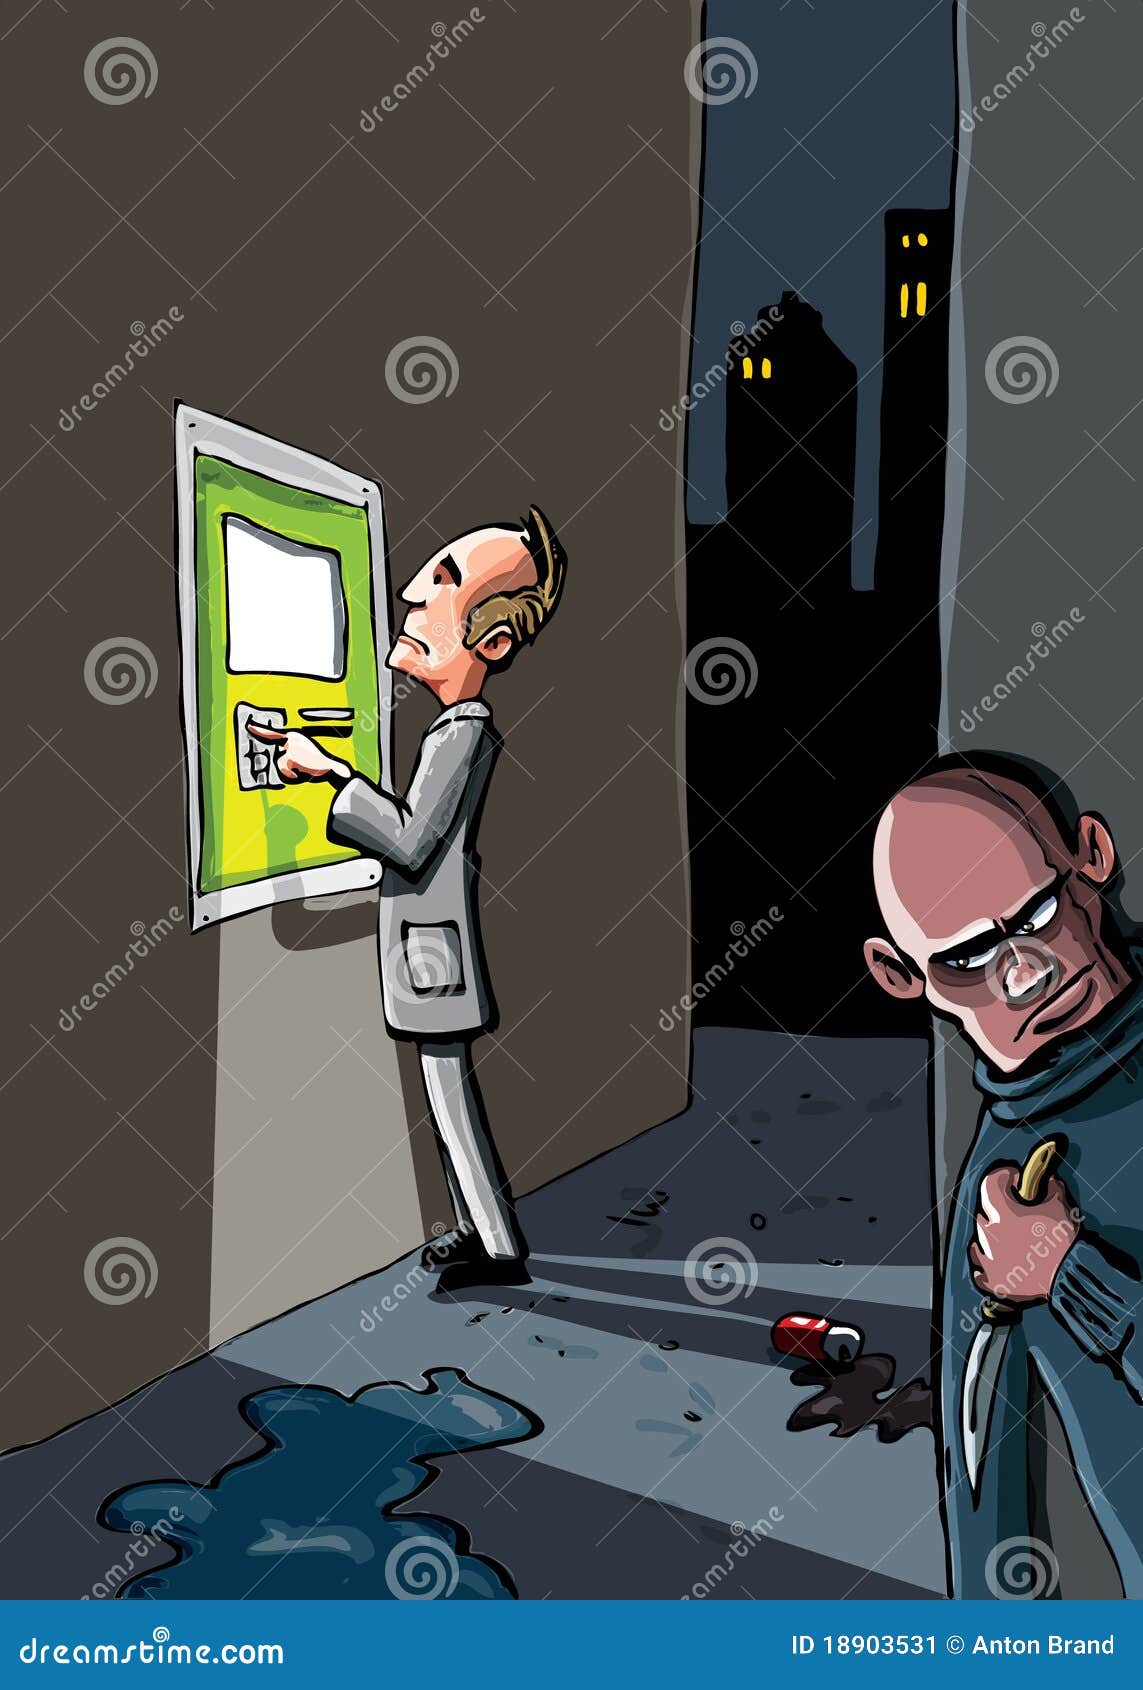 Cartoon Of A Crime That Is About Stock Image - Image: 18903531